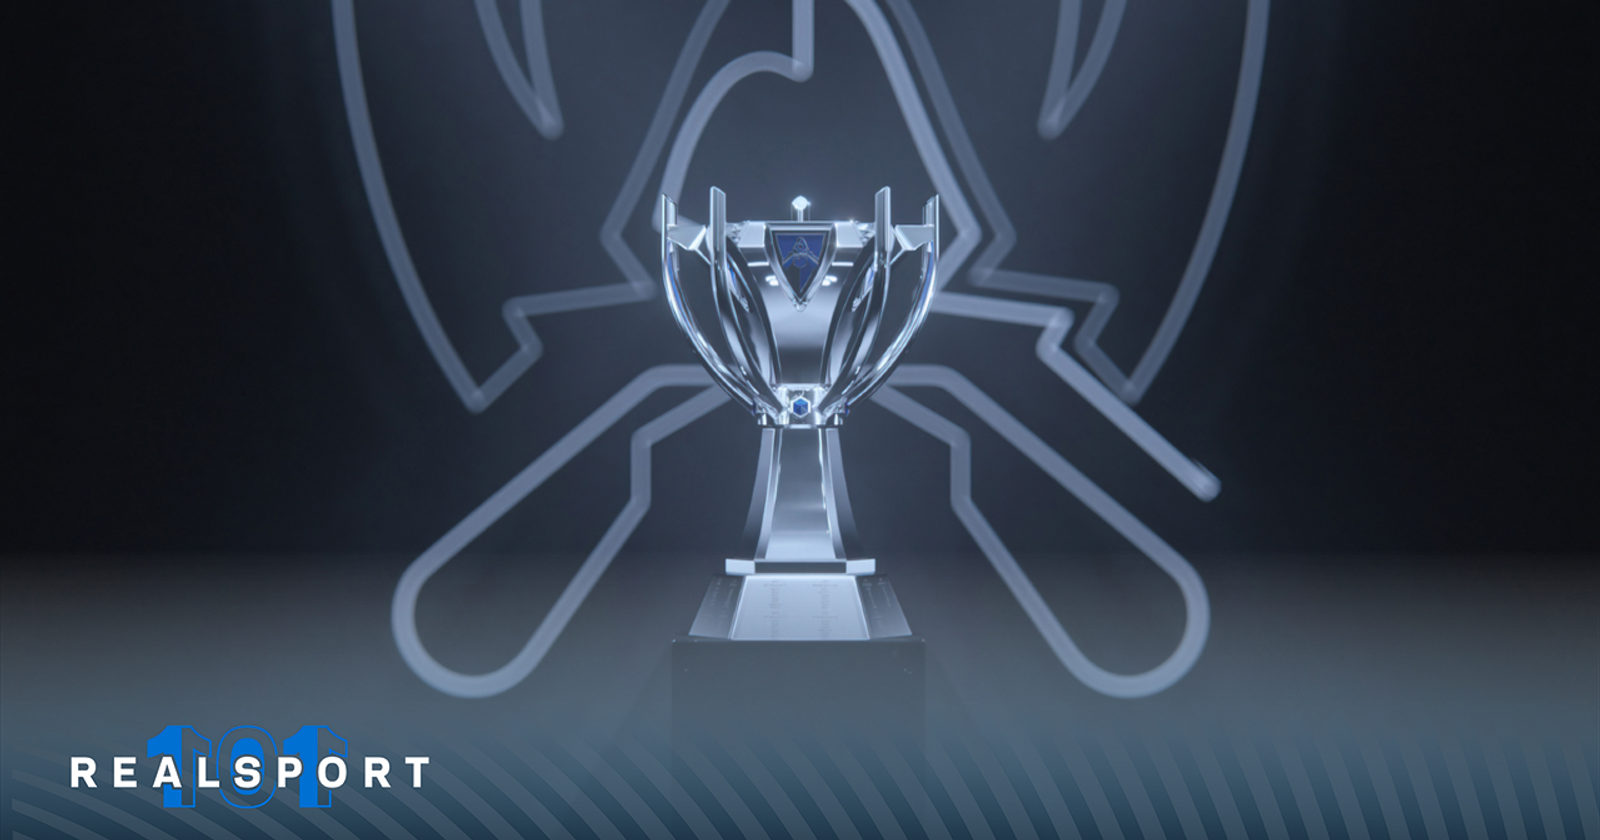 A Closer Look At LoL's Summoner's Cup